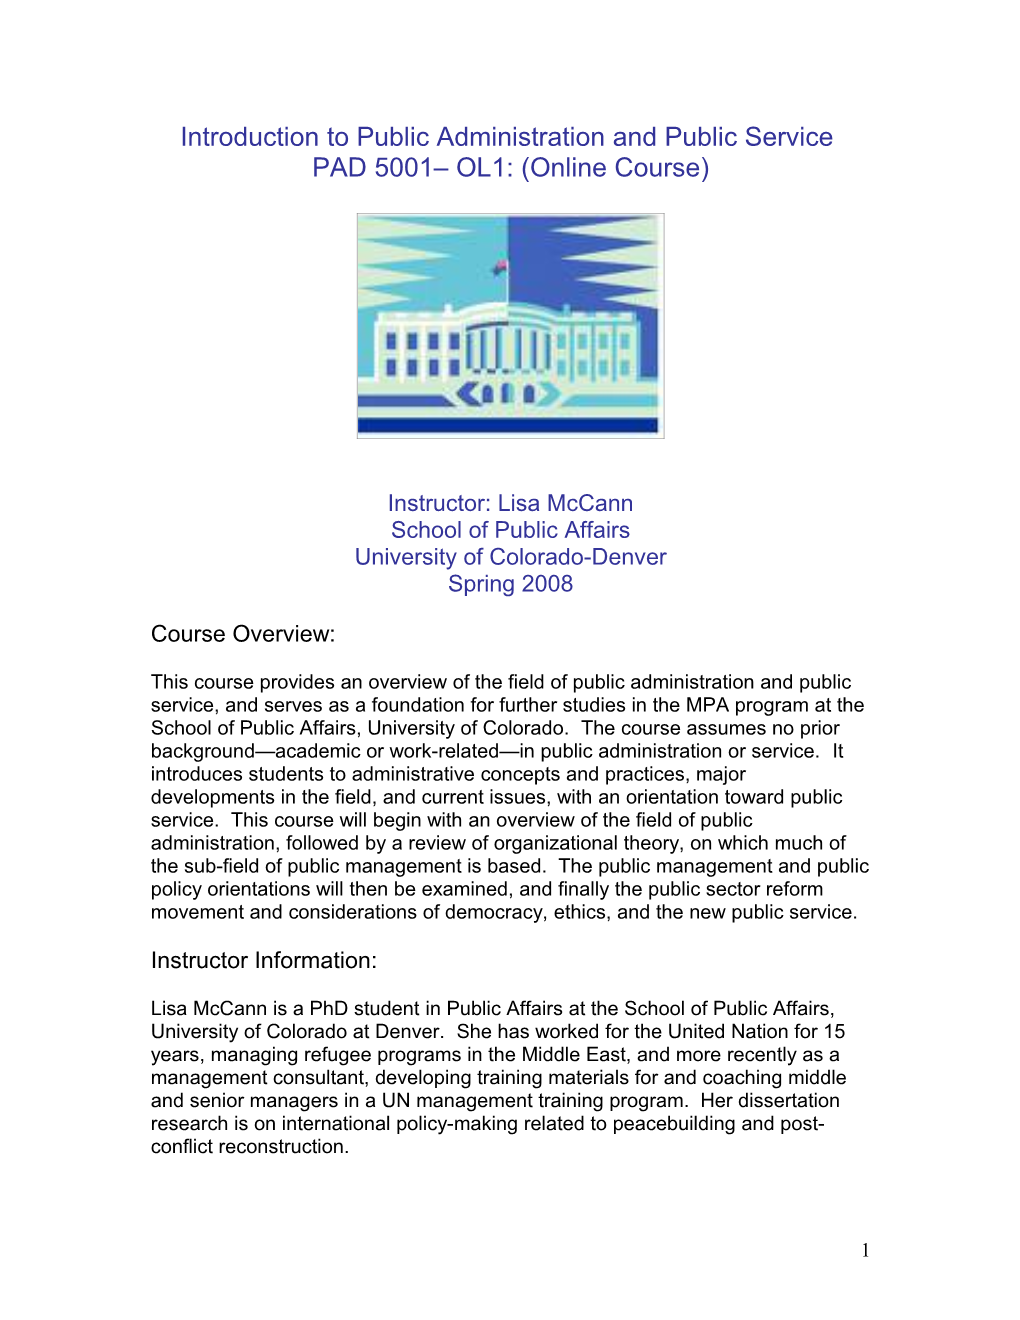 PAD 5001 OL1: Introduction to Public Administration and Public Service (Online Course)